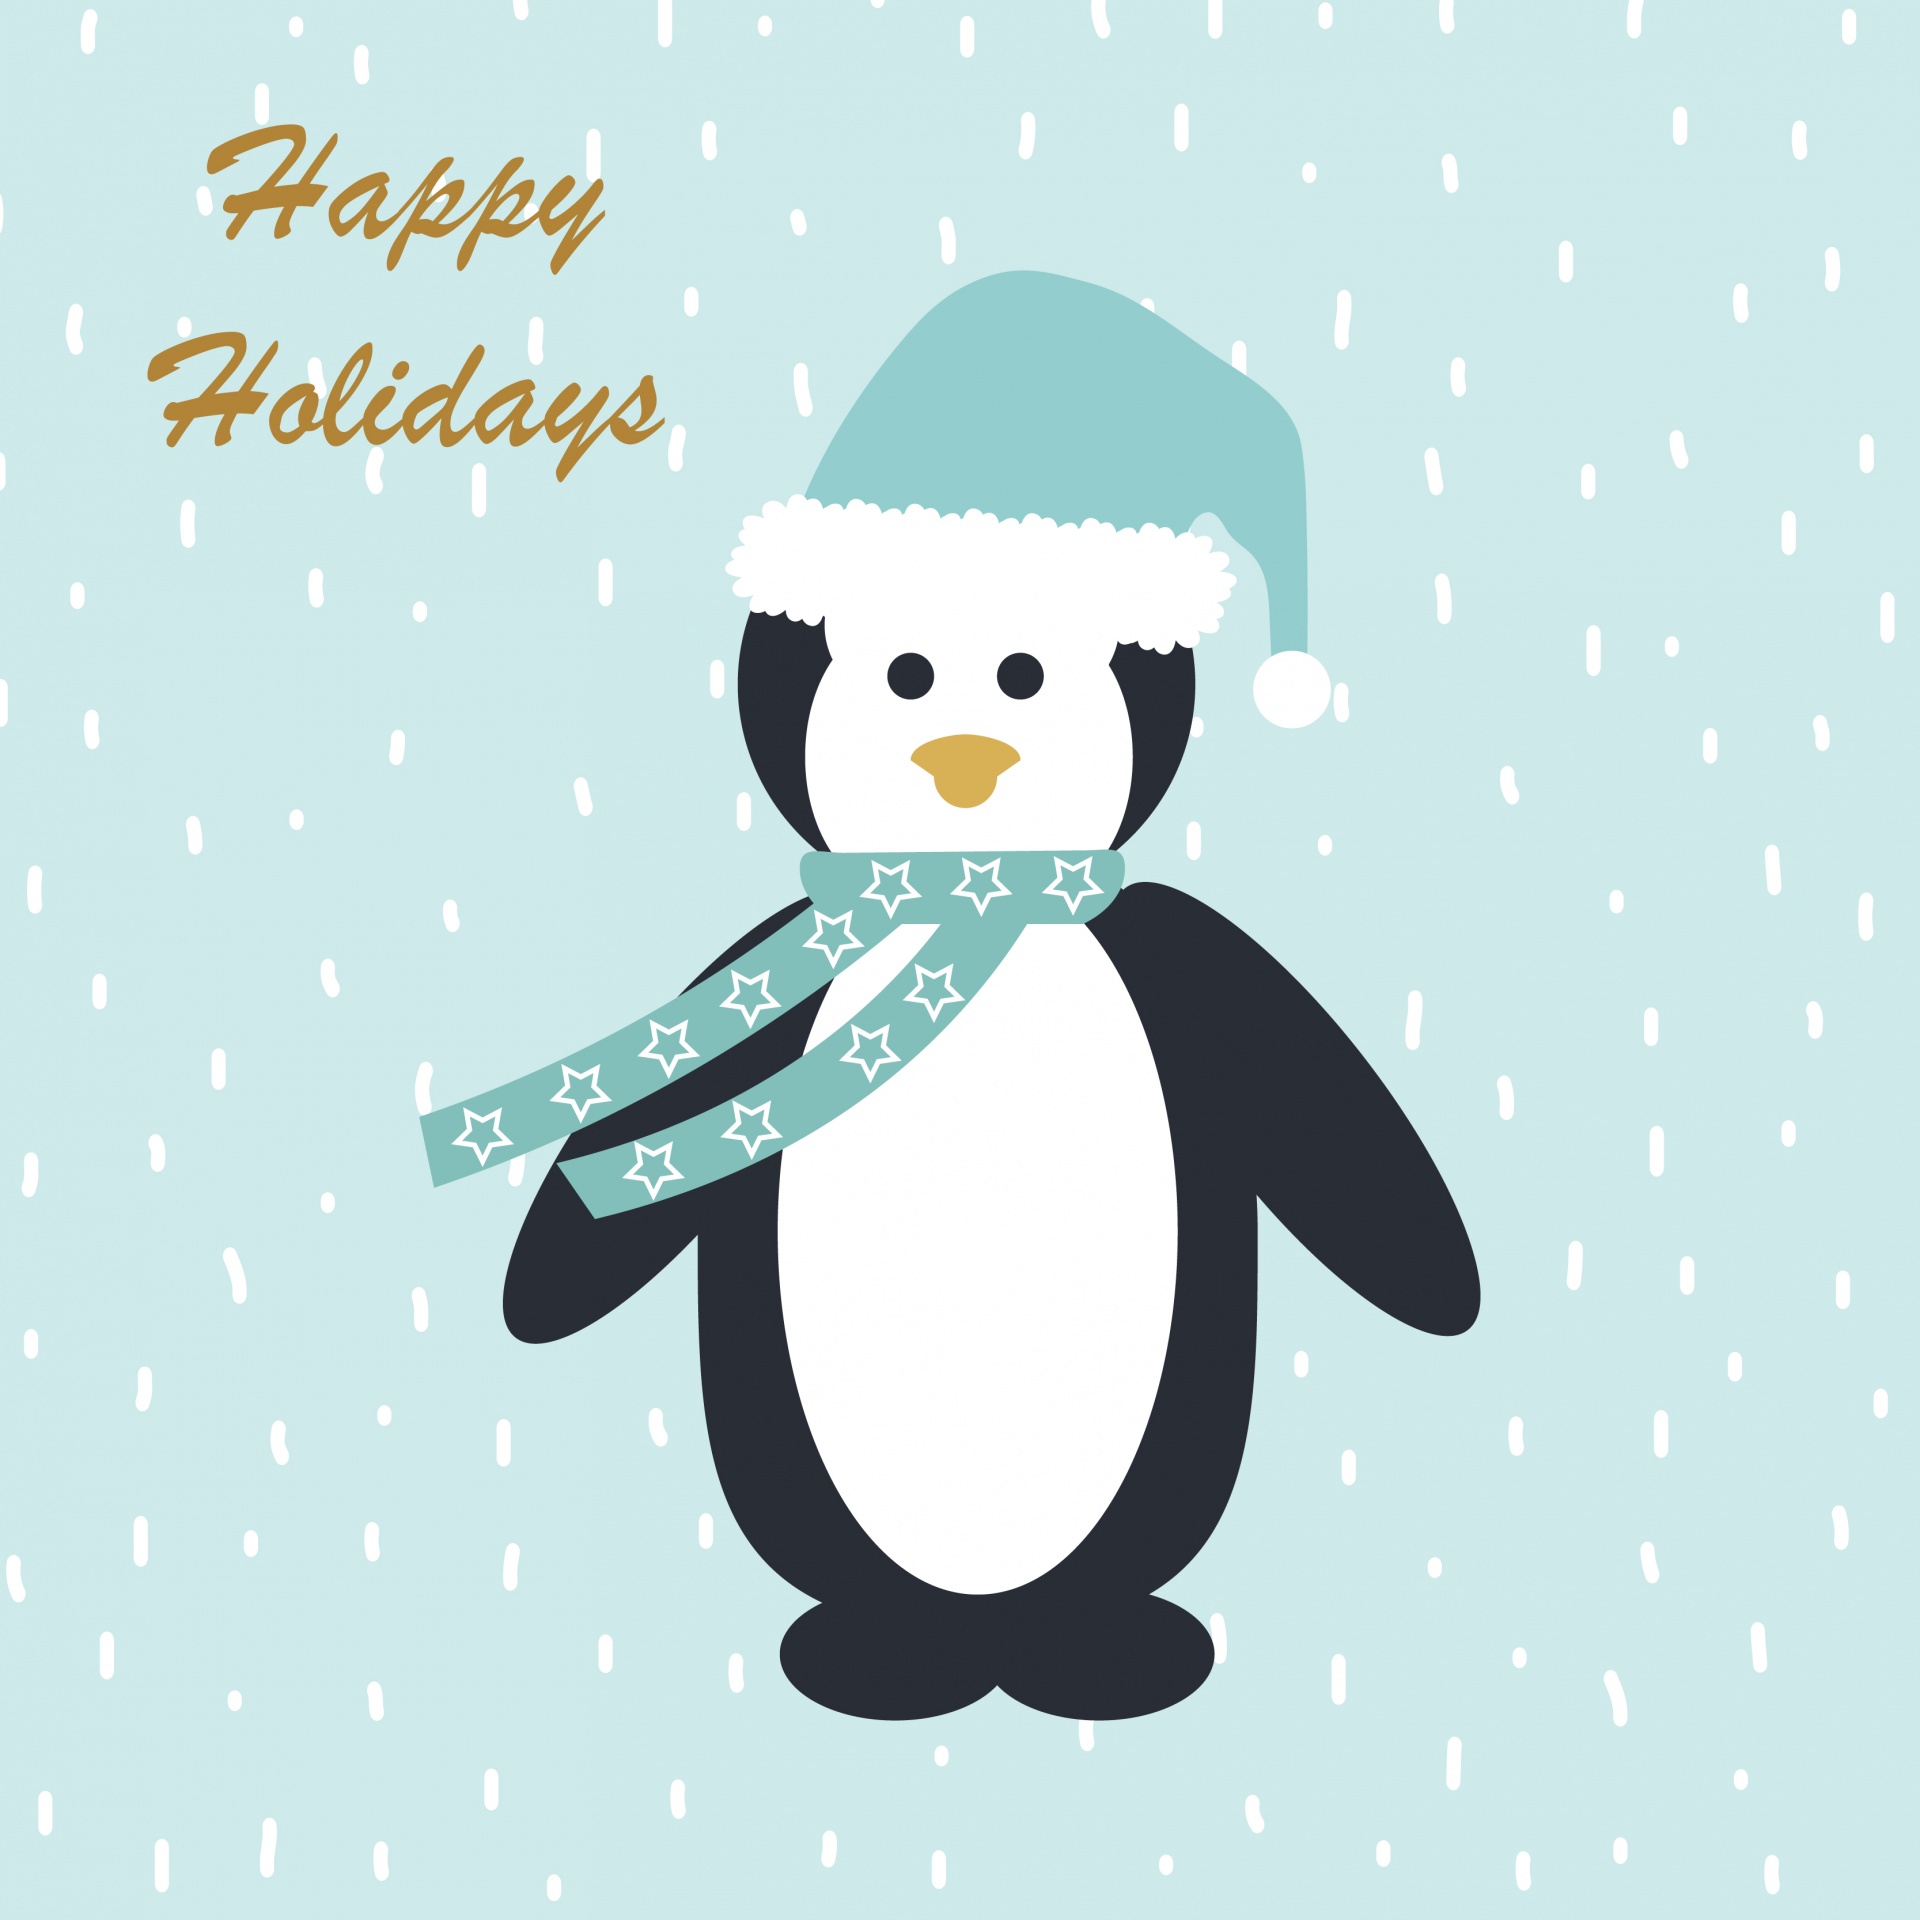 Penguin Holiday Card